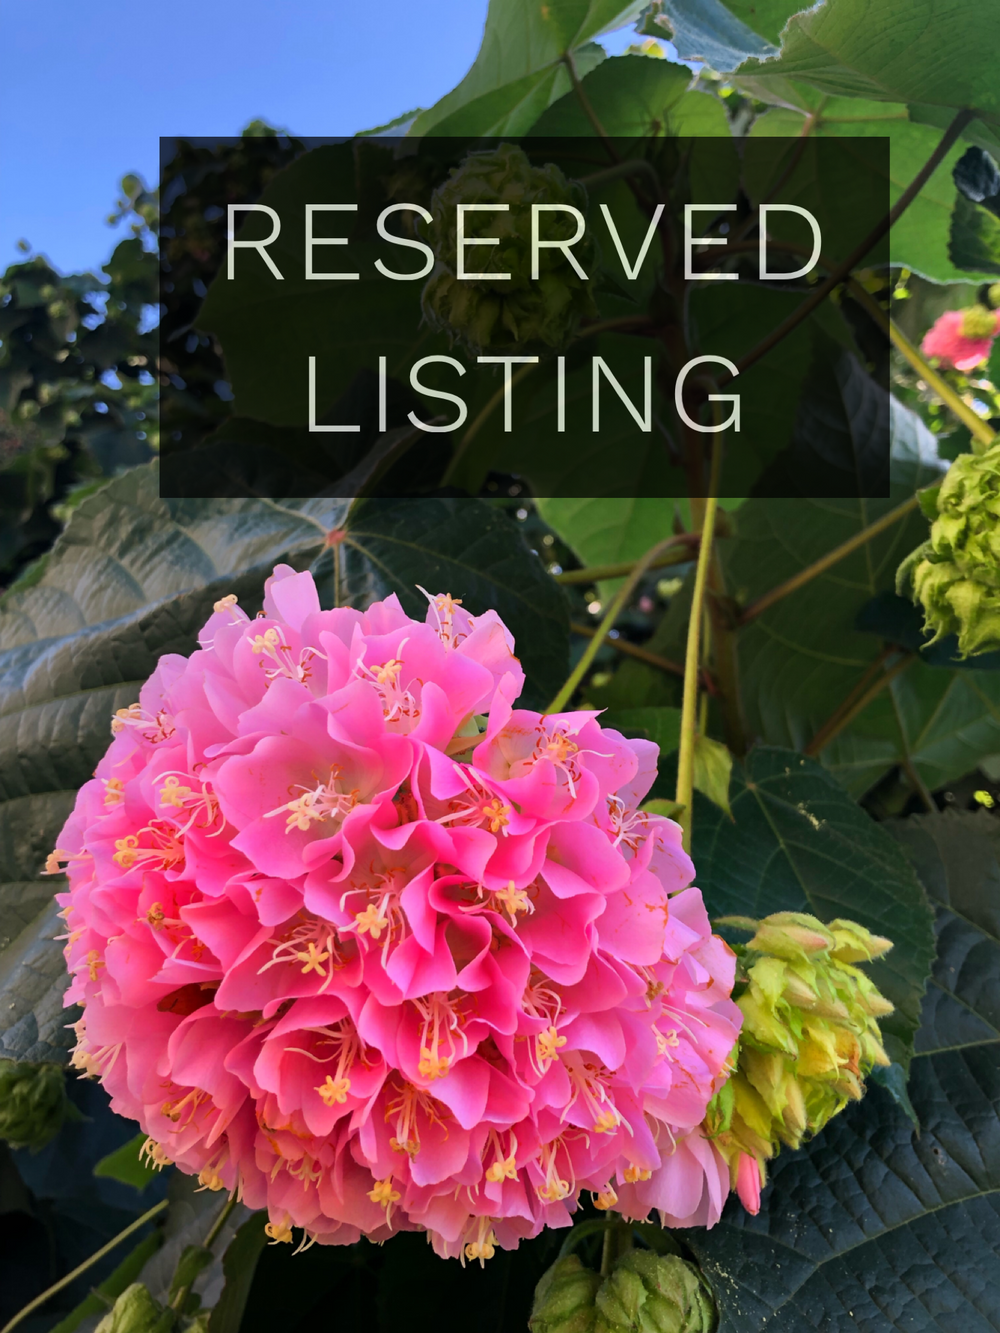 RESERVED LISTING - bonghits4bee